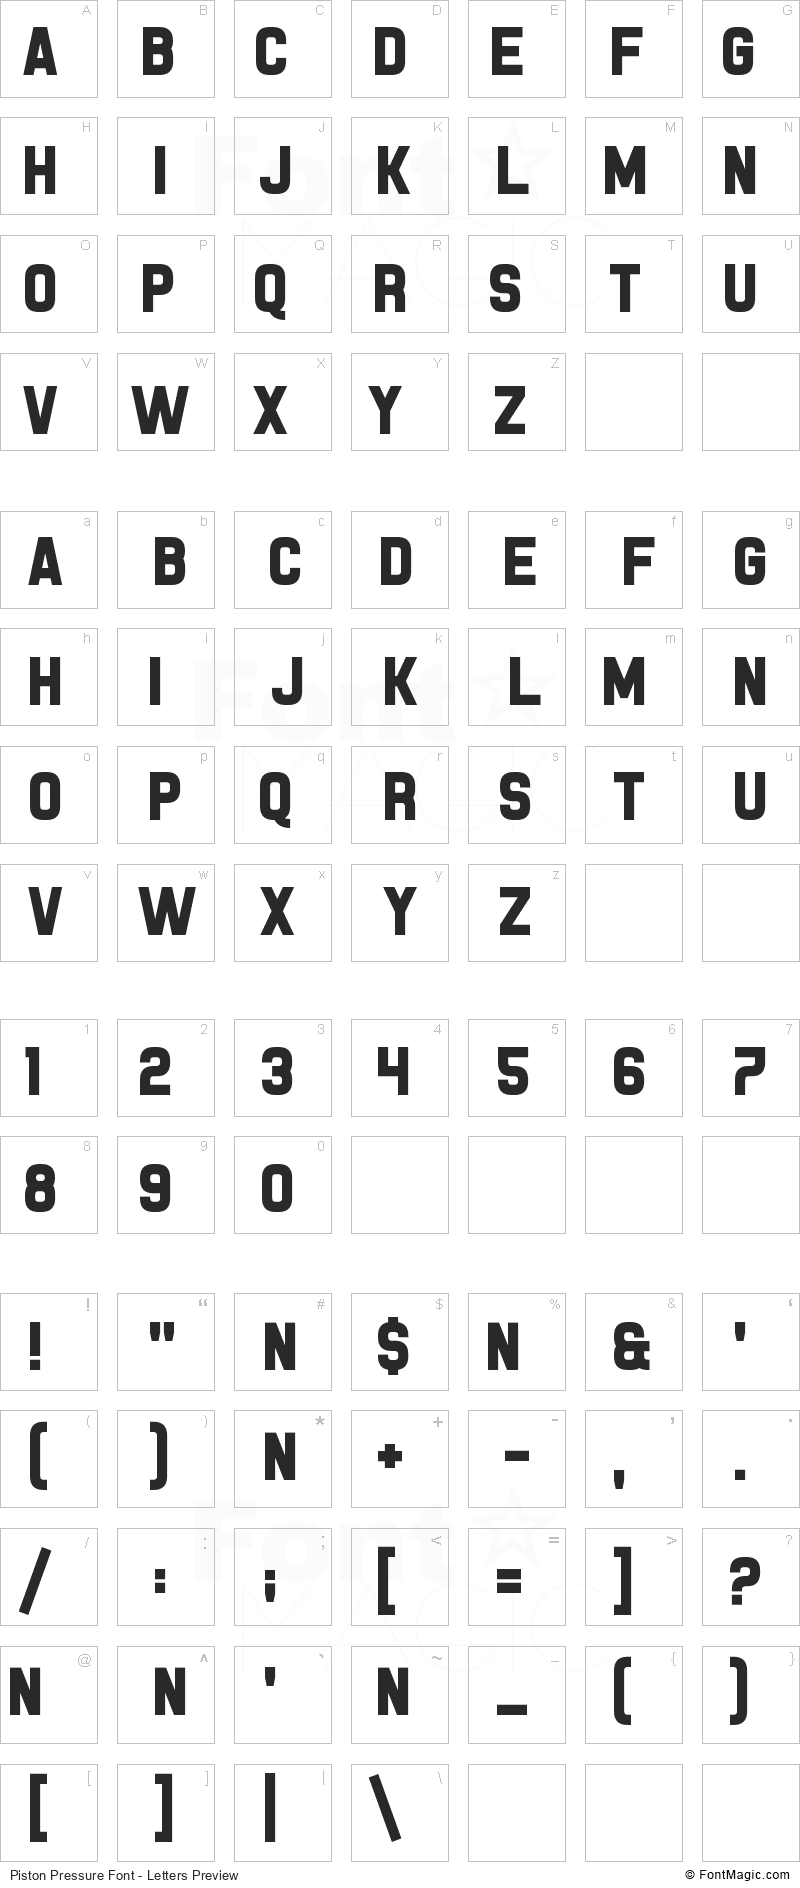 Piston Pressure Font - All Latters Preview Chart